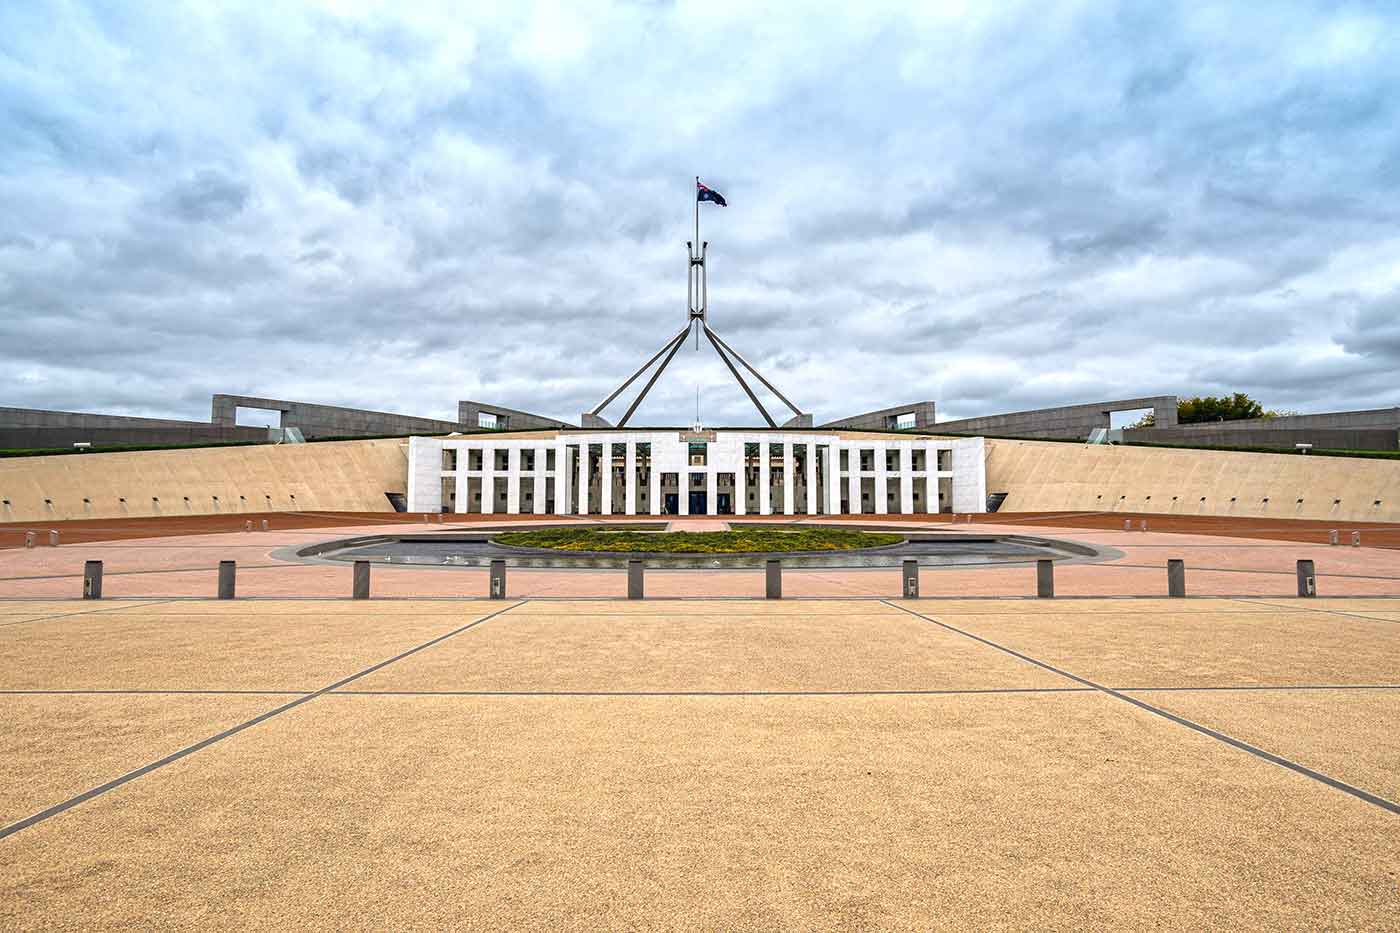 New Parliament House